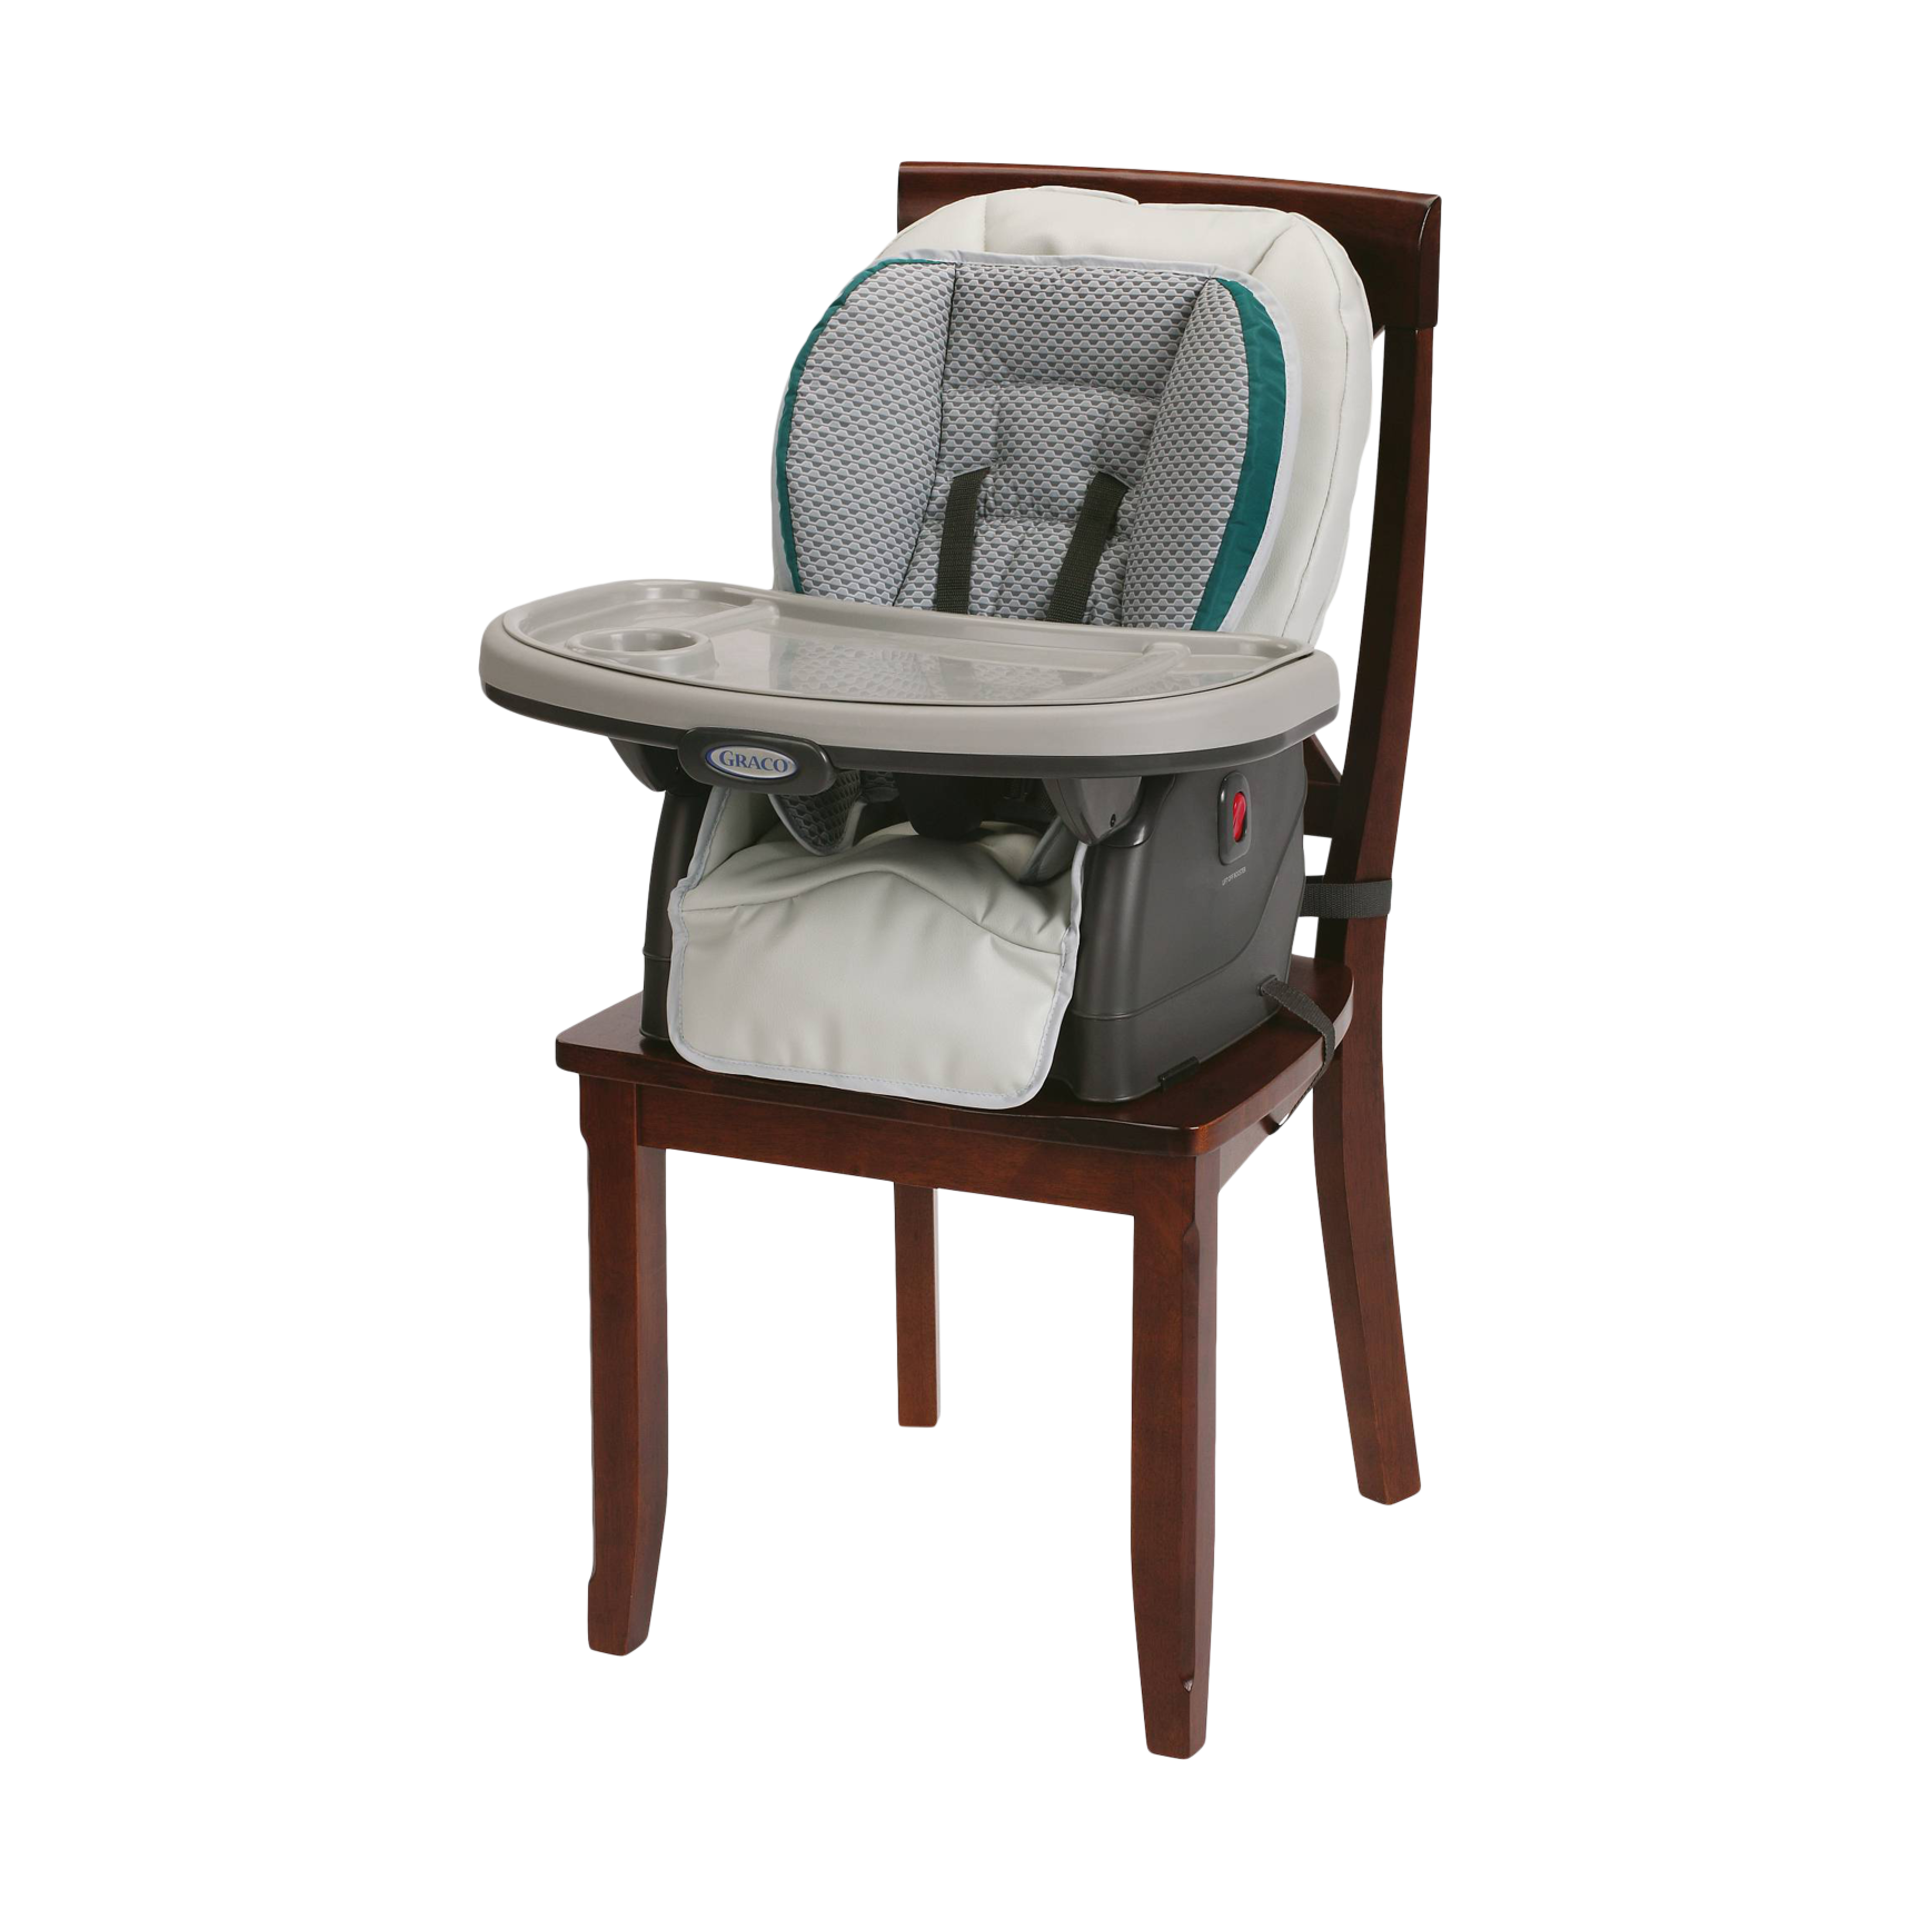 graco 6 in 1 high chair blossom